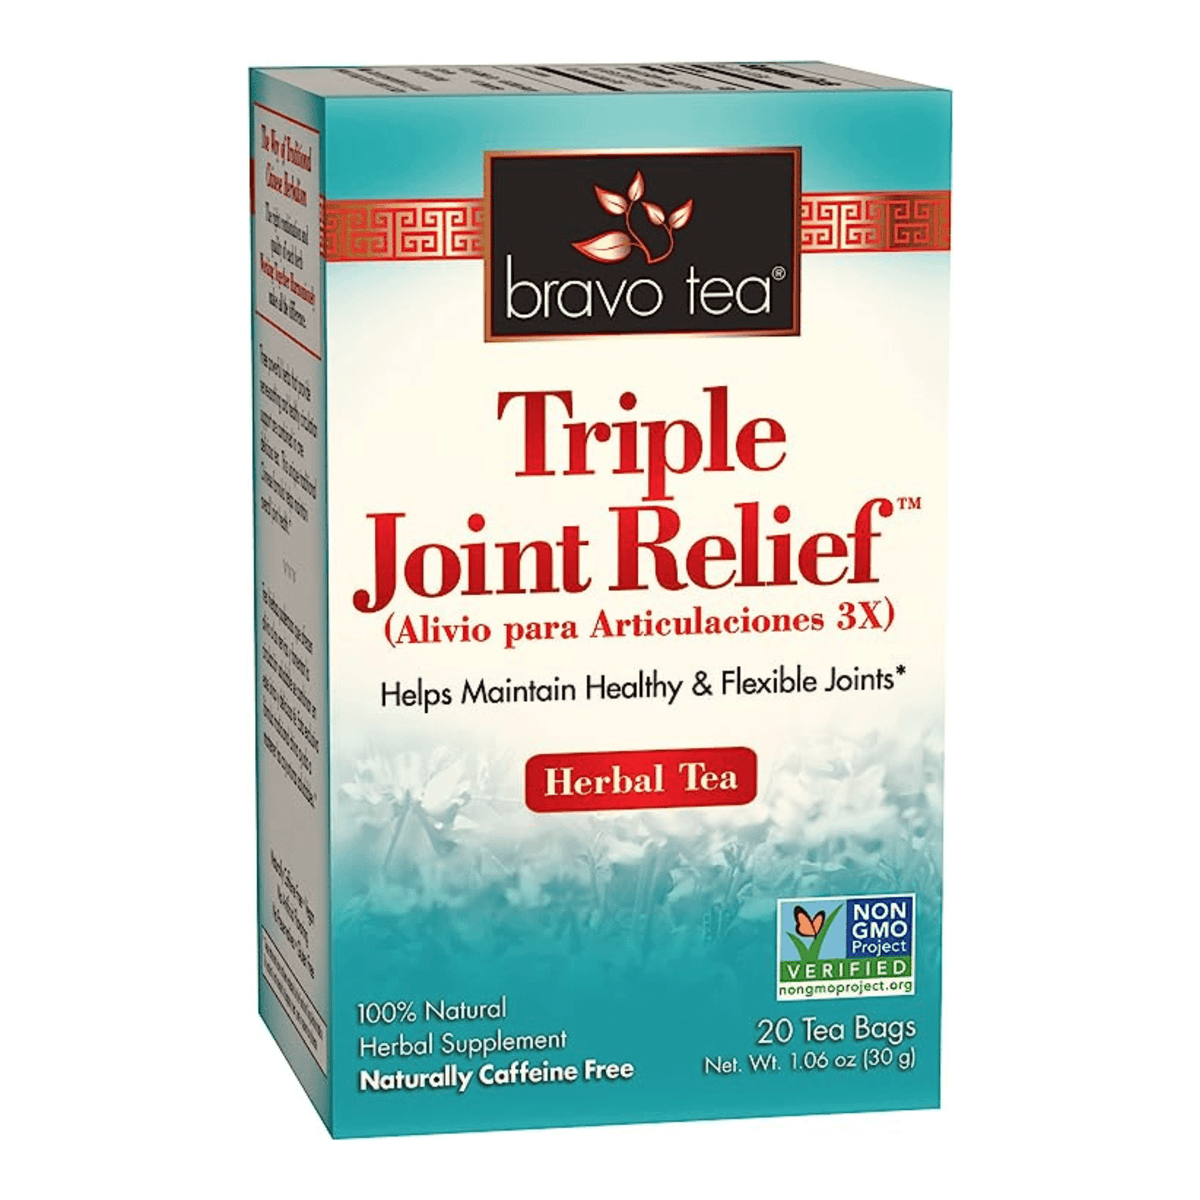 Primary Image of Triple Joint Relief Tea Bags